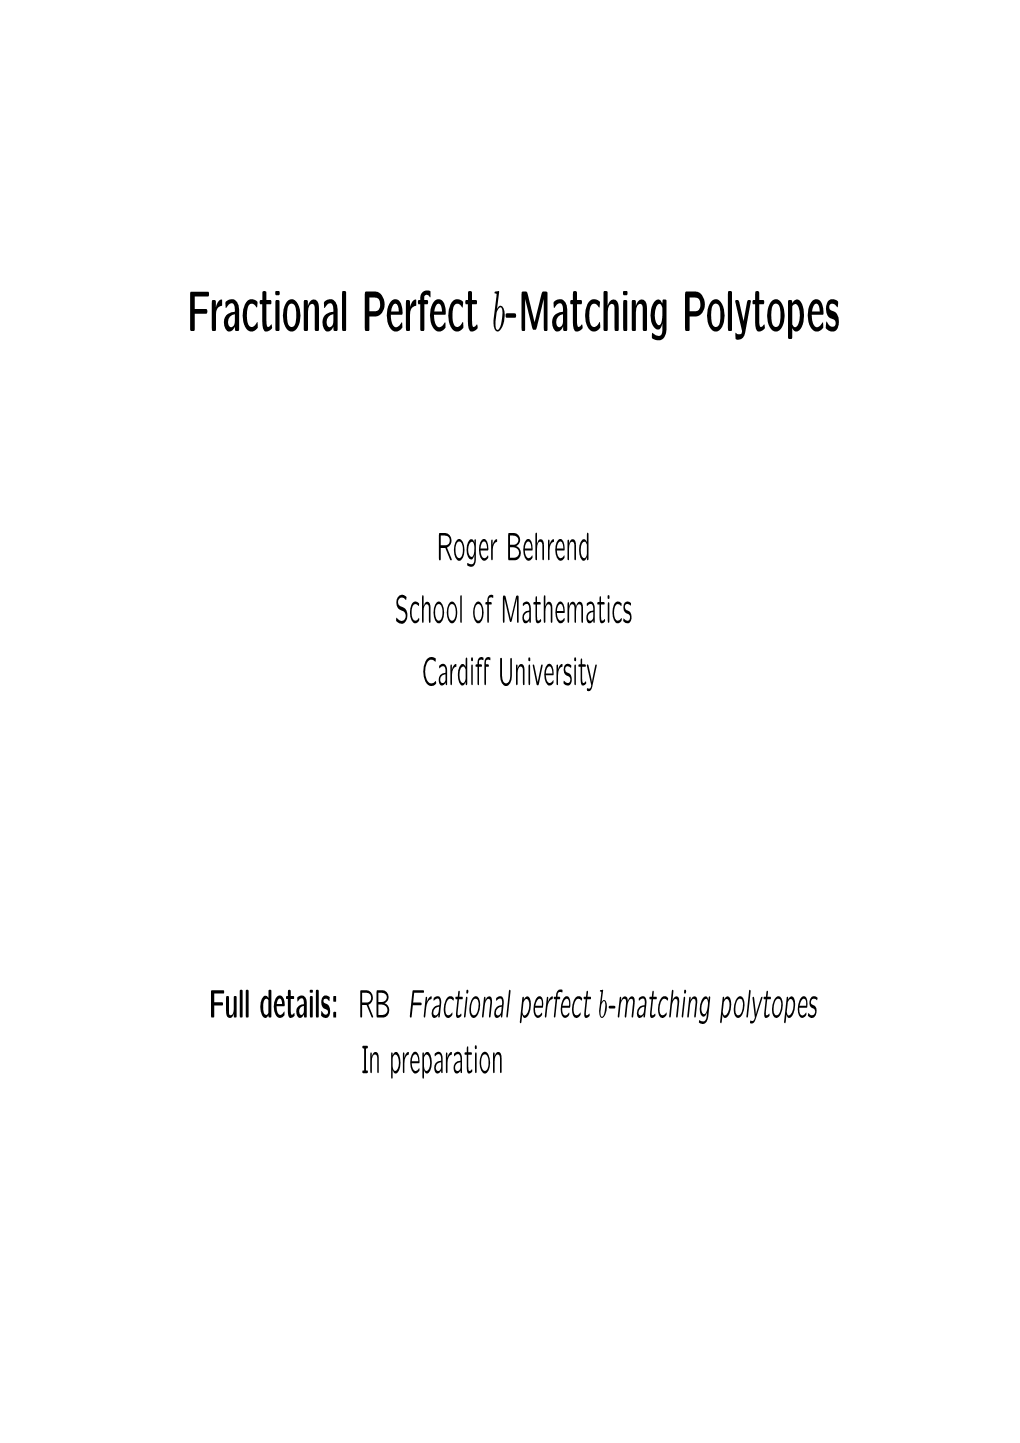 Fractional Perfect B-Matching Polytopes